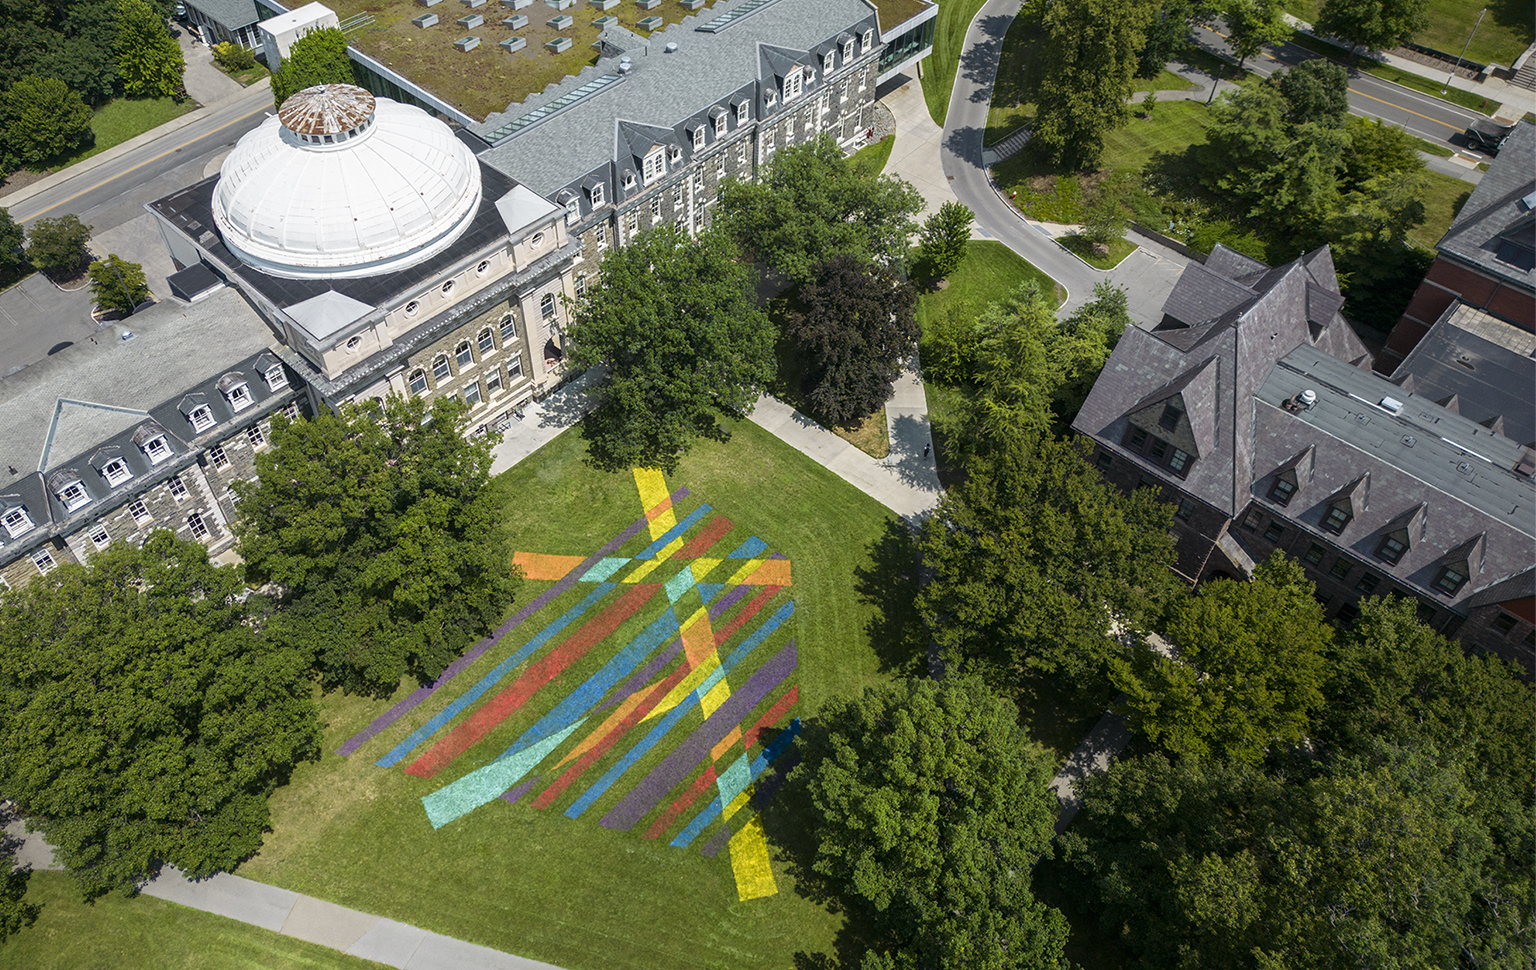 Aerial view of brightly painted geometric design on green grass